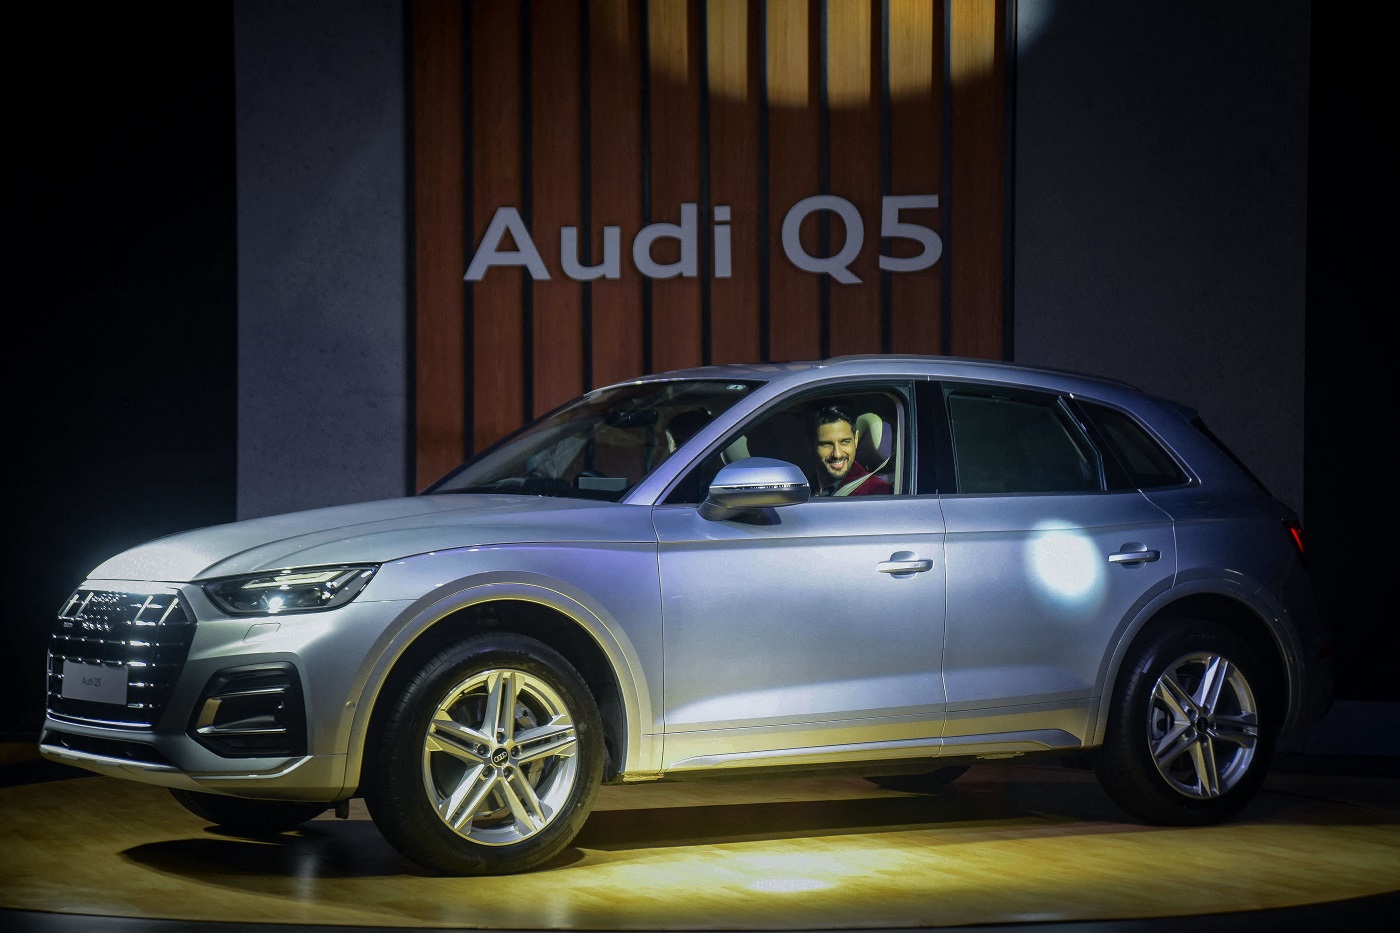 Audi Q5 in silver at an auto show